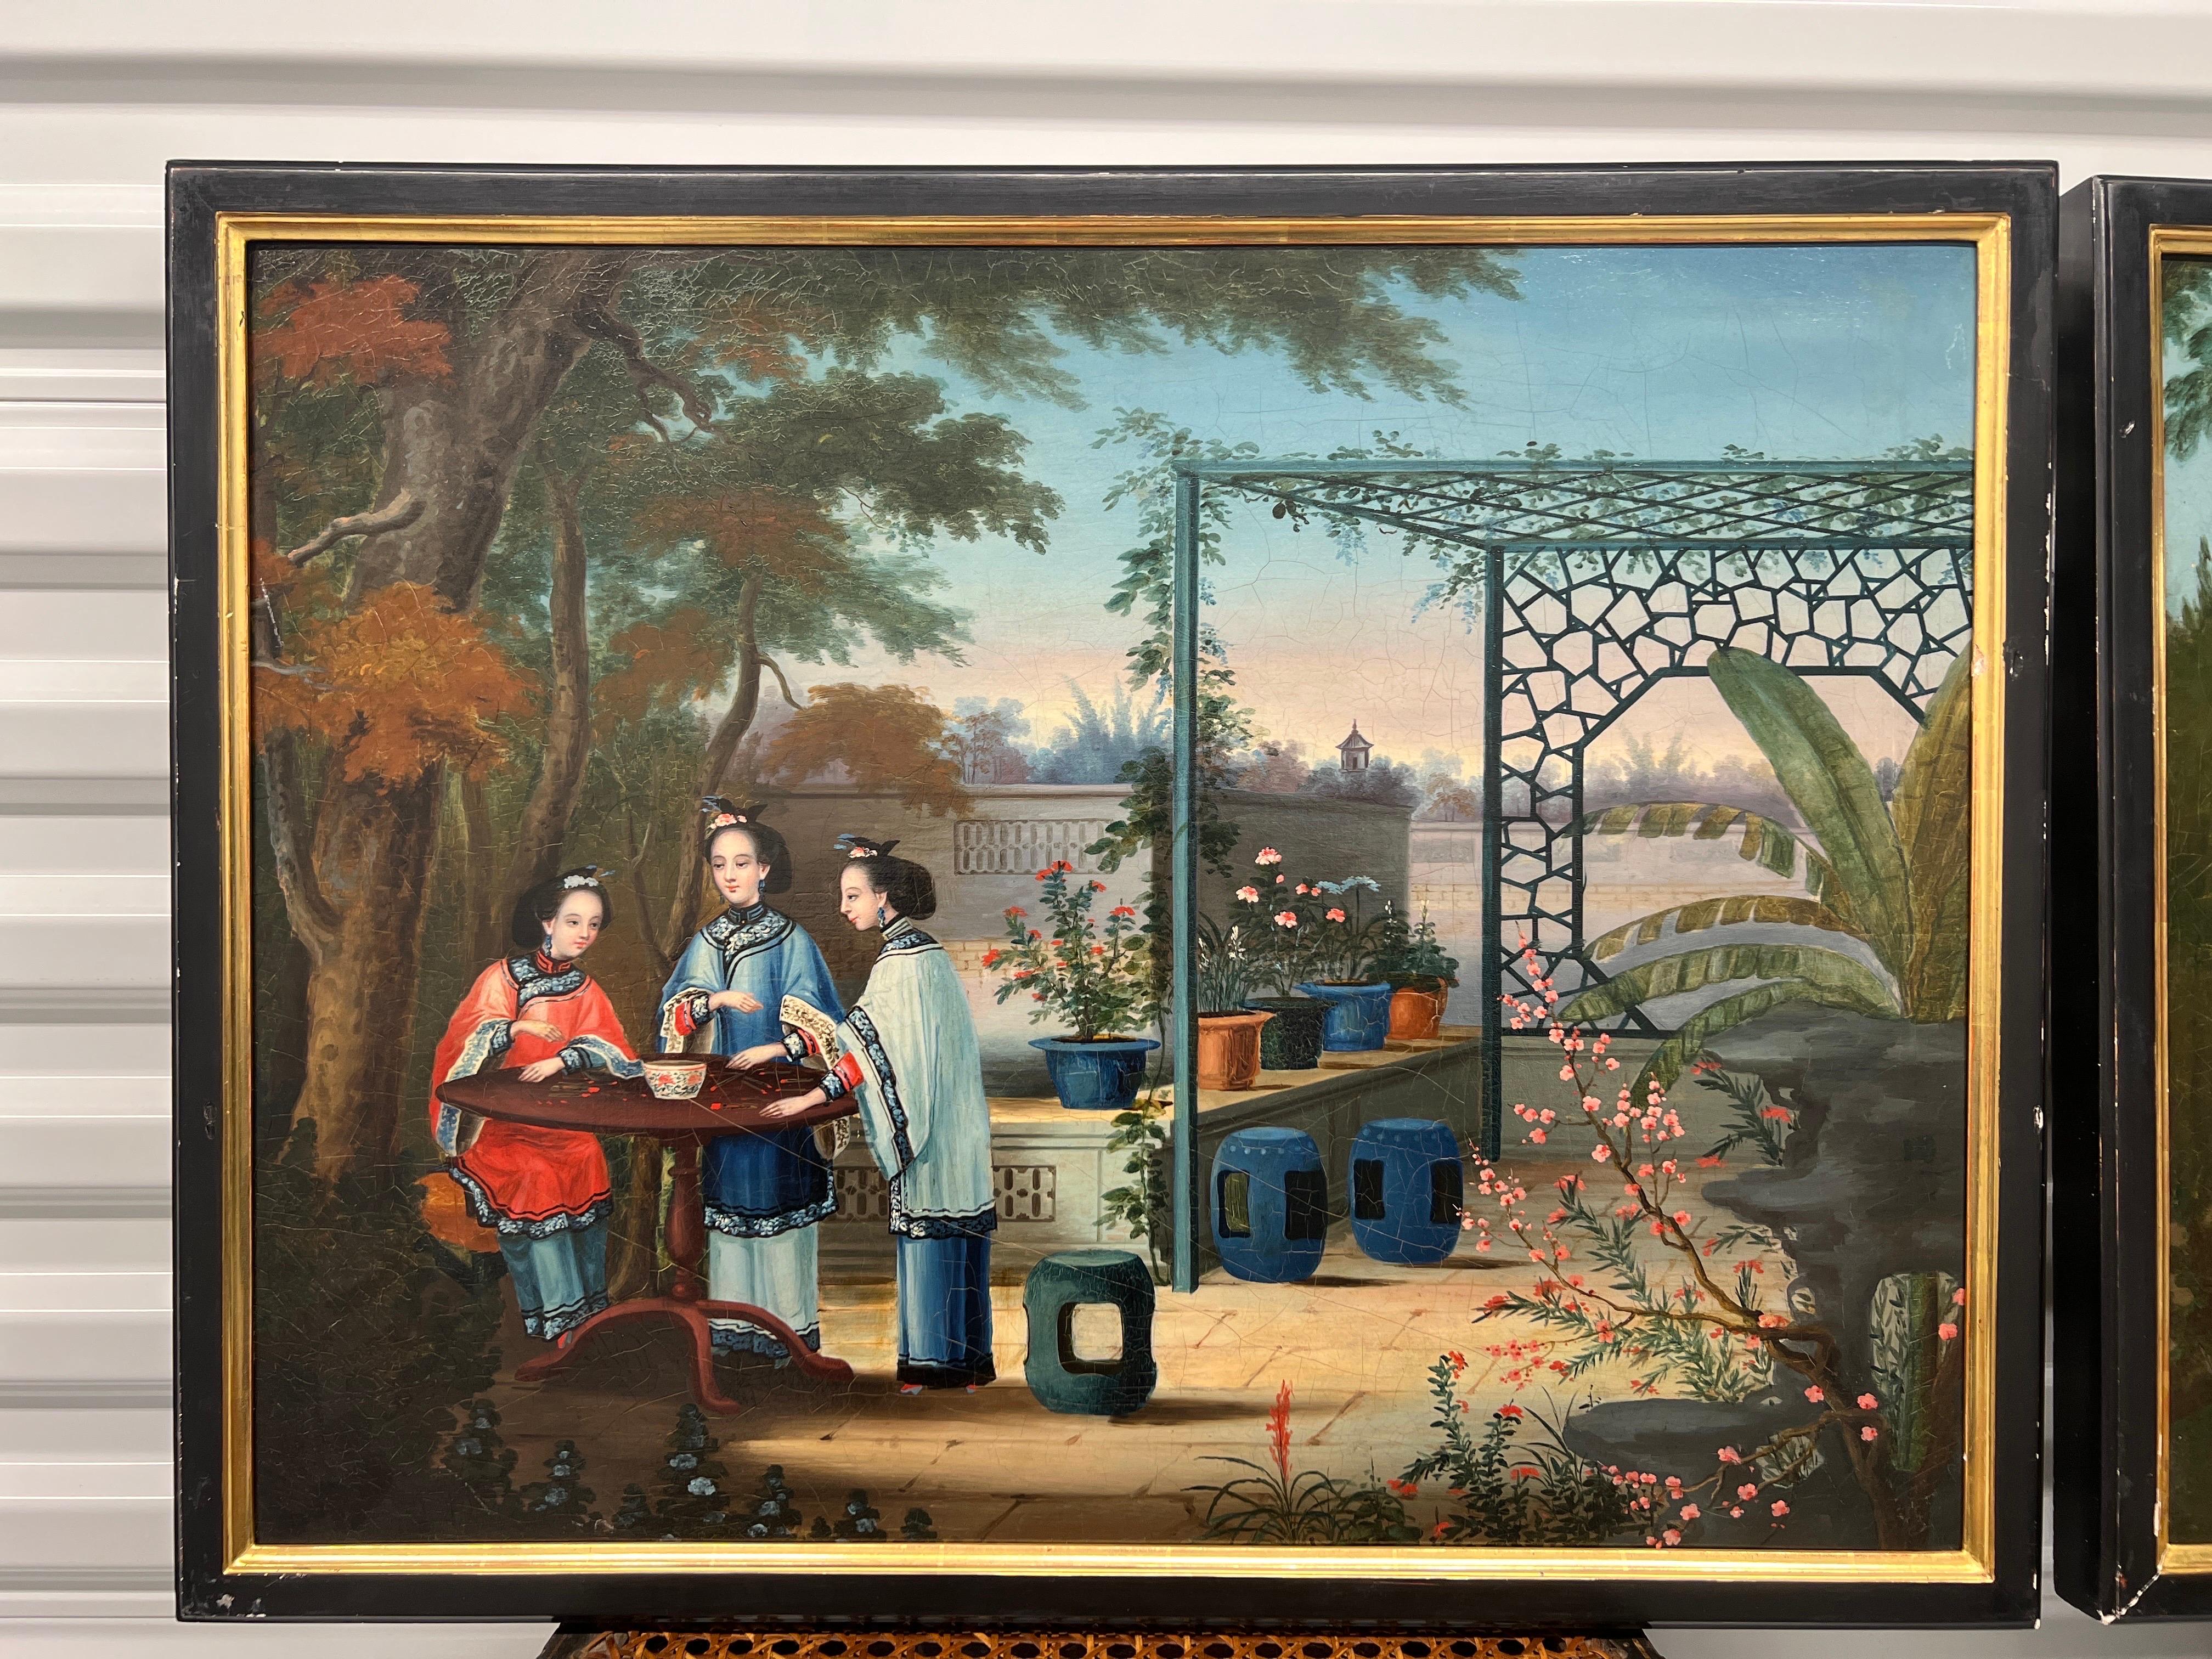 Chinese Export, mid 19th century. 

An exceptional and original 4 piece set of Chinese Export oil paintings on canvas depicting exterior garden scenes of ladies and children collecting over tea and walking through the gardens. 
Each painting is done